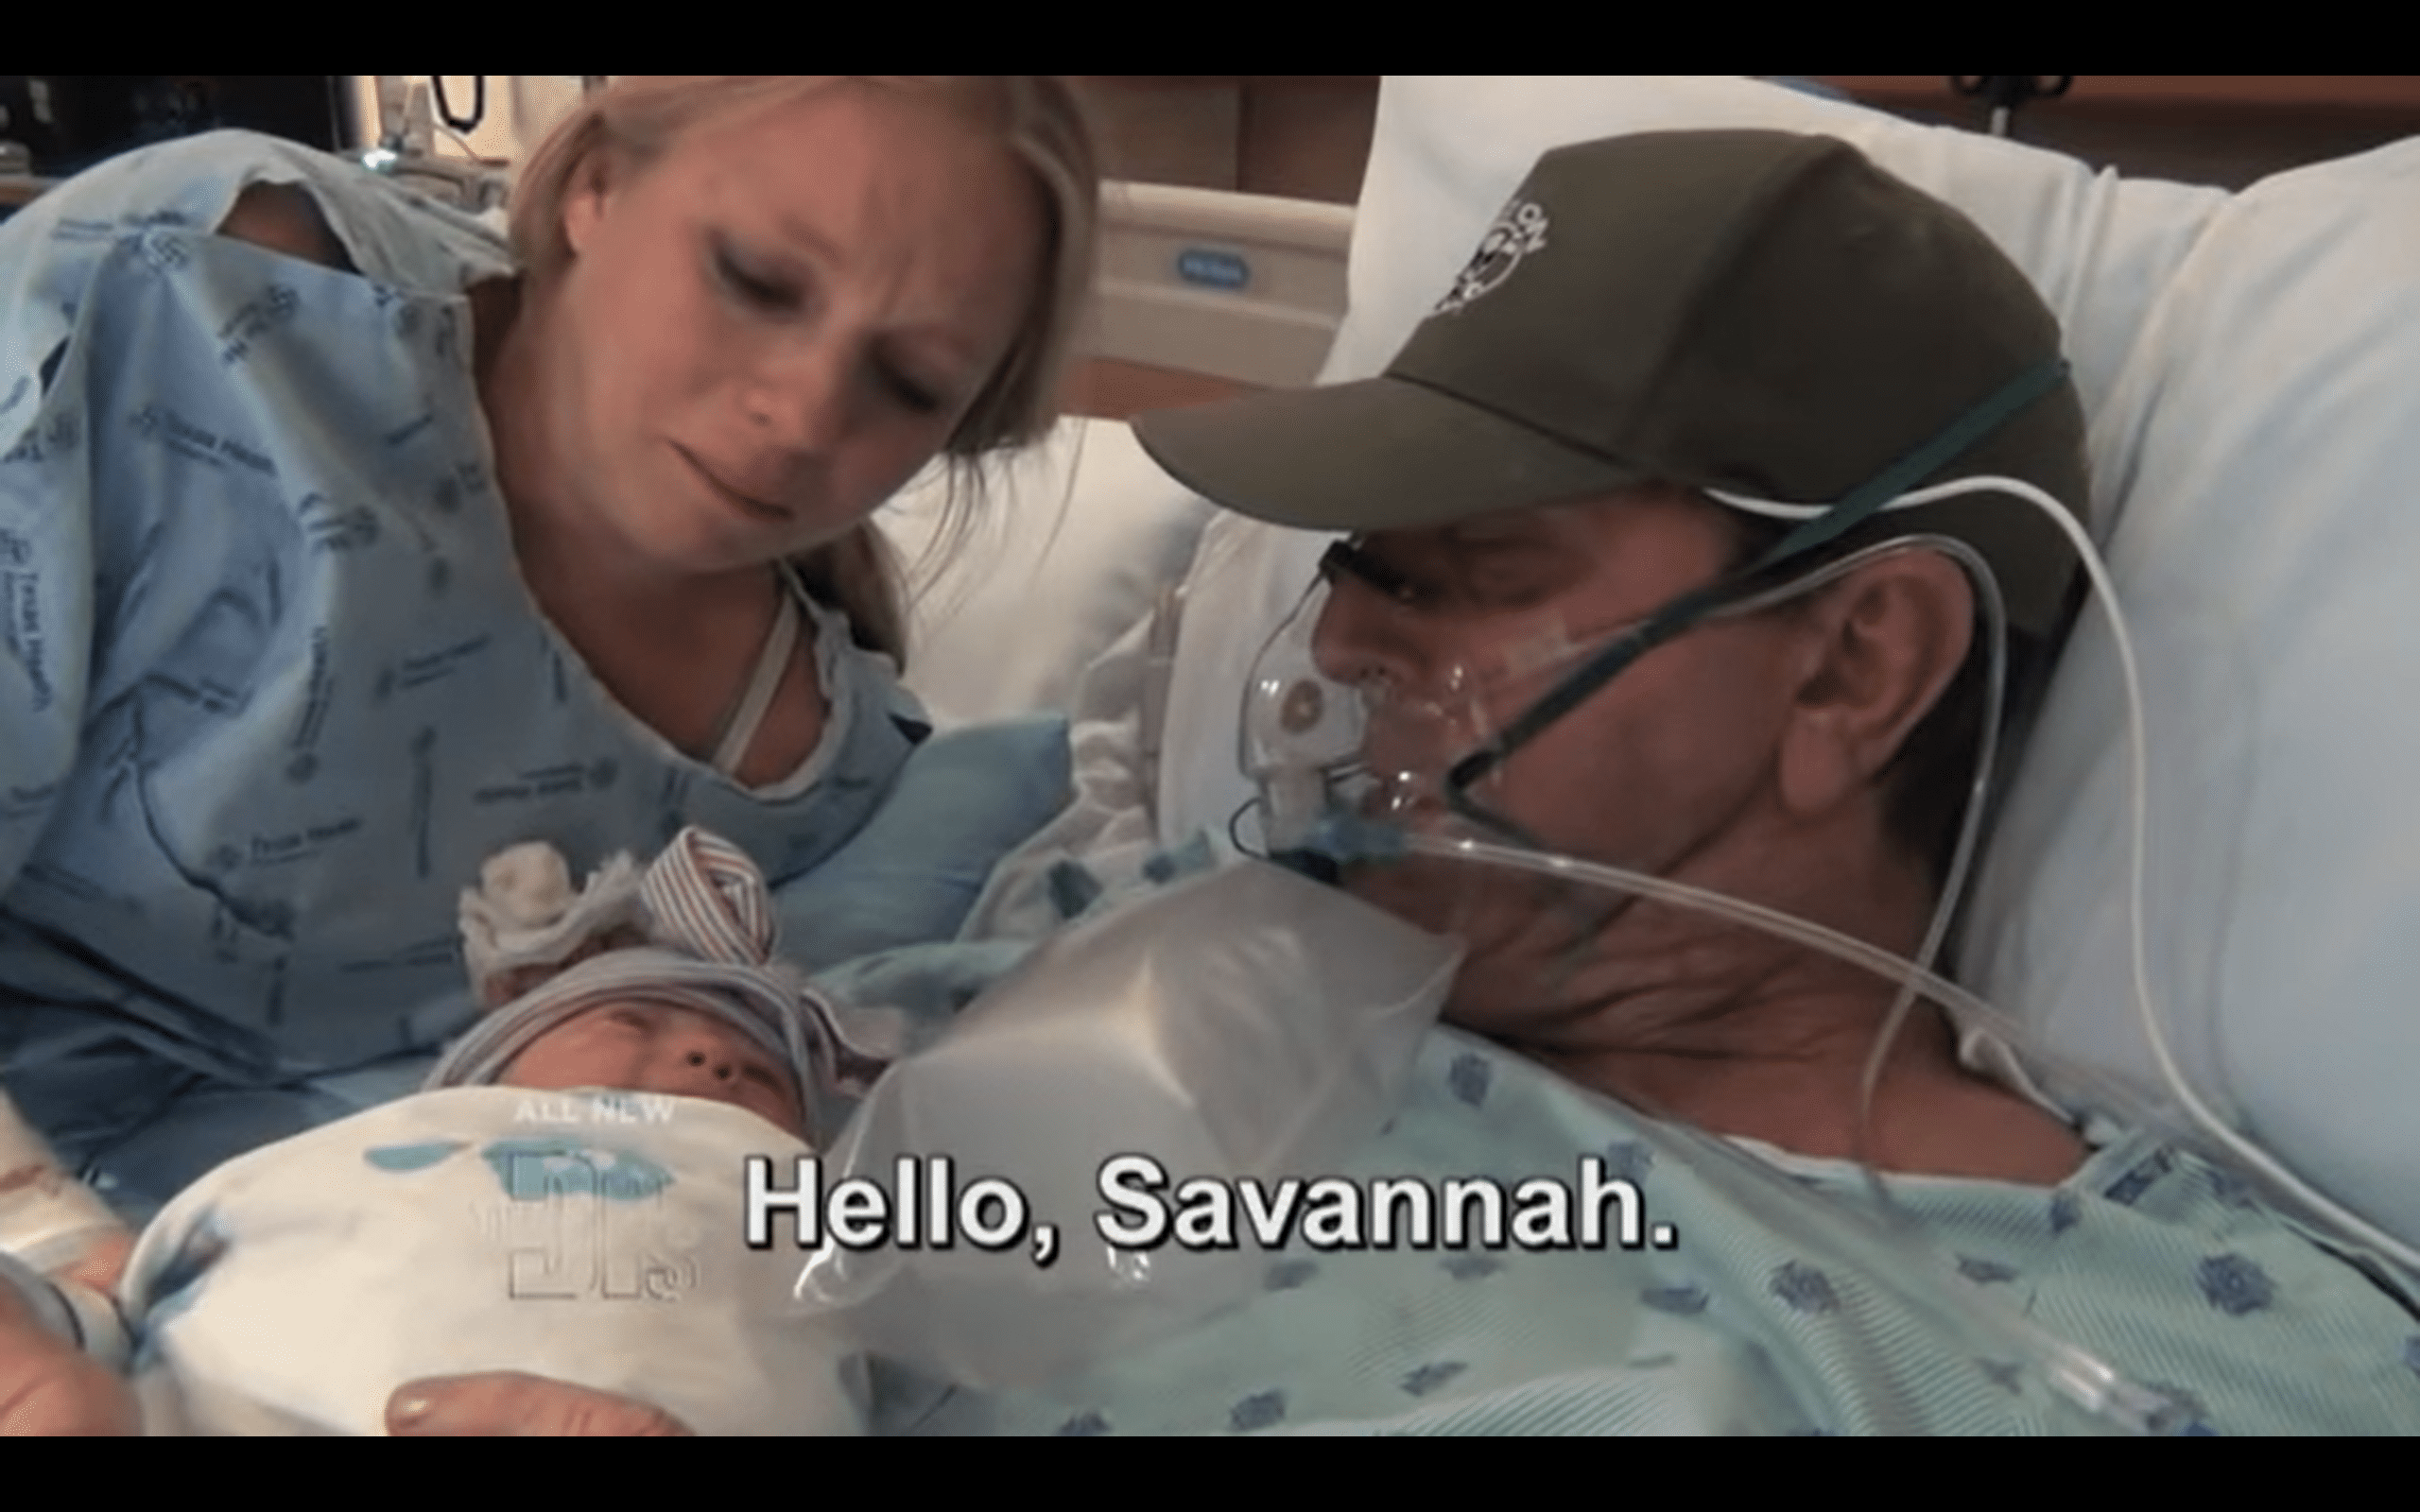 Dying man meets his daughter who was born two weeks earlier than delivery date. | Photo: youtube.com/The Doctors